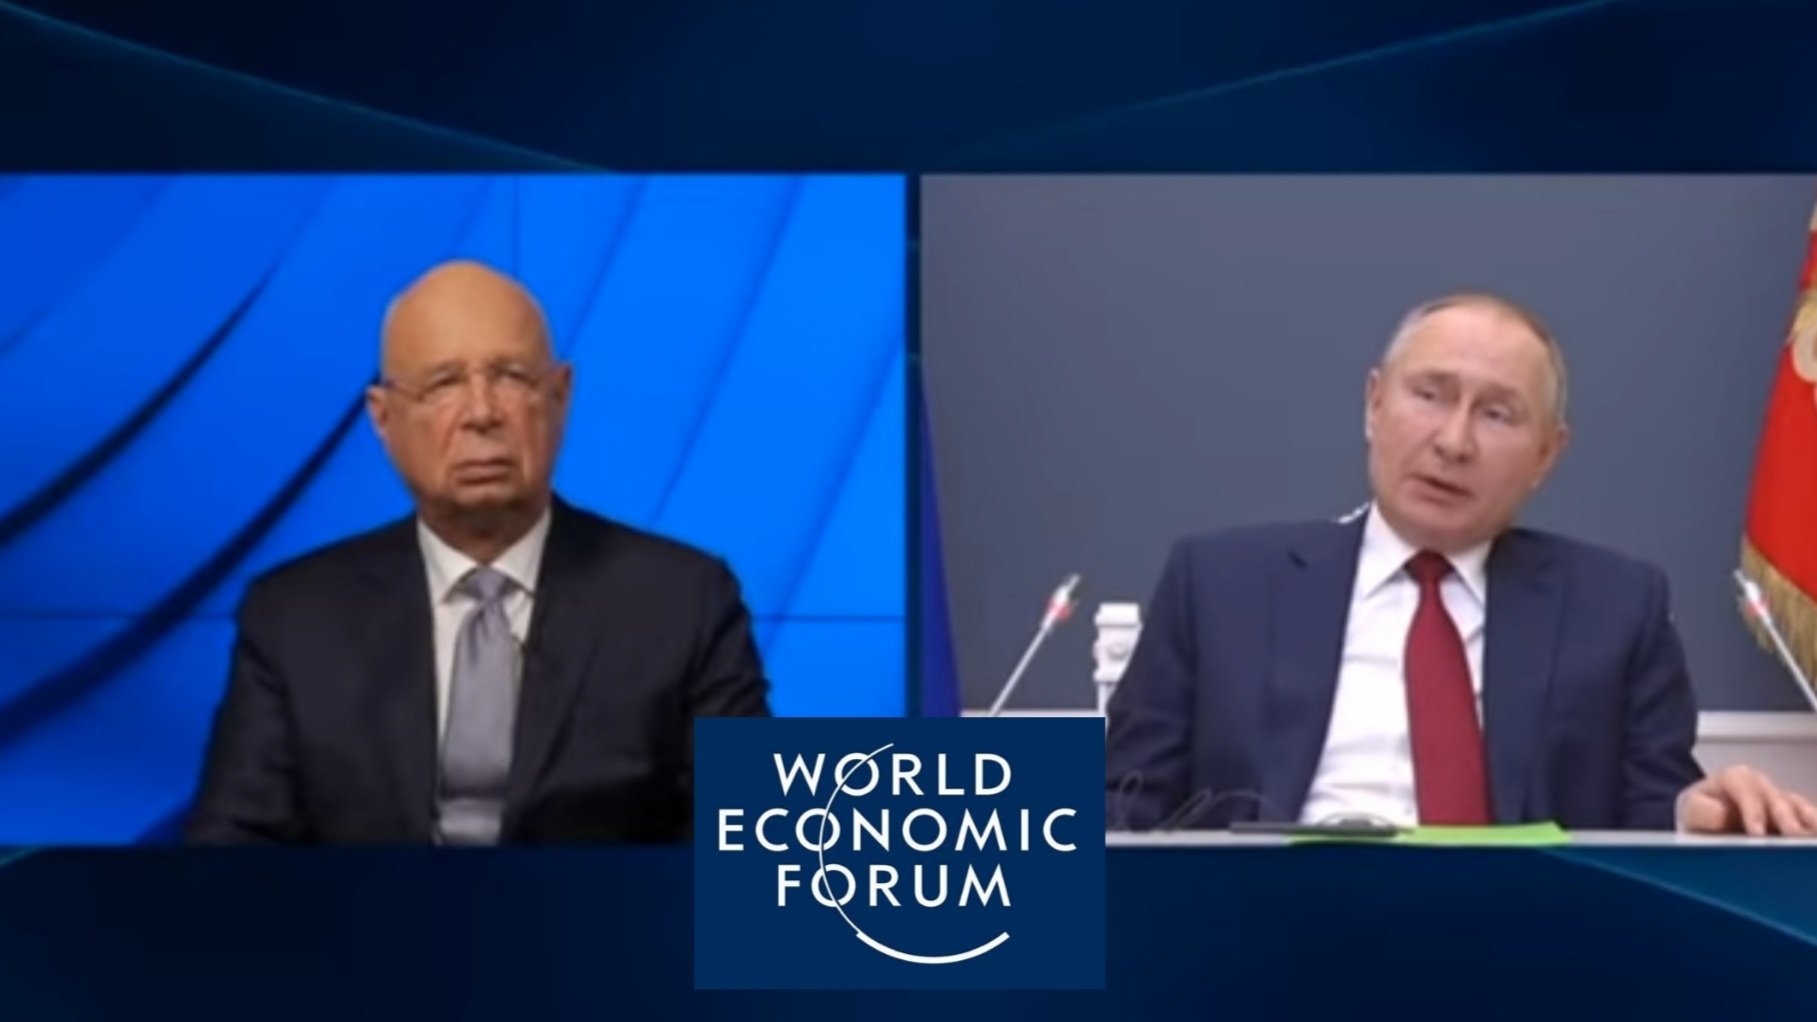 Klaus Schwab’s ‘World Economic Forum’ Cuts Off “All Relations” With Russia, Scrubs Putin From WEF Website